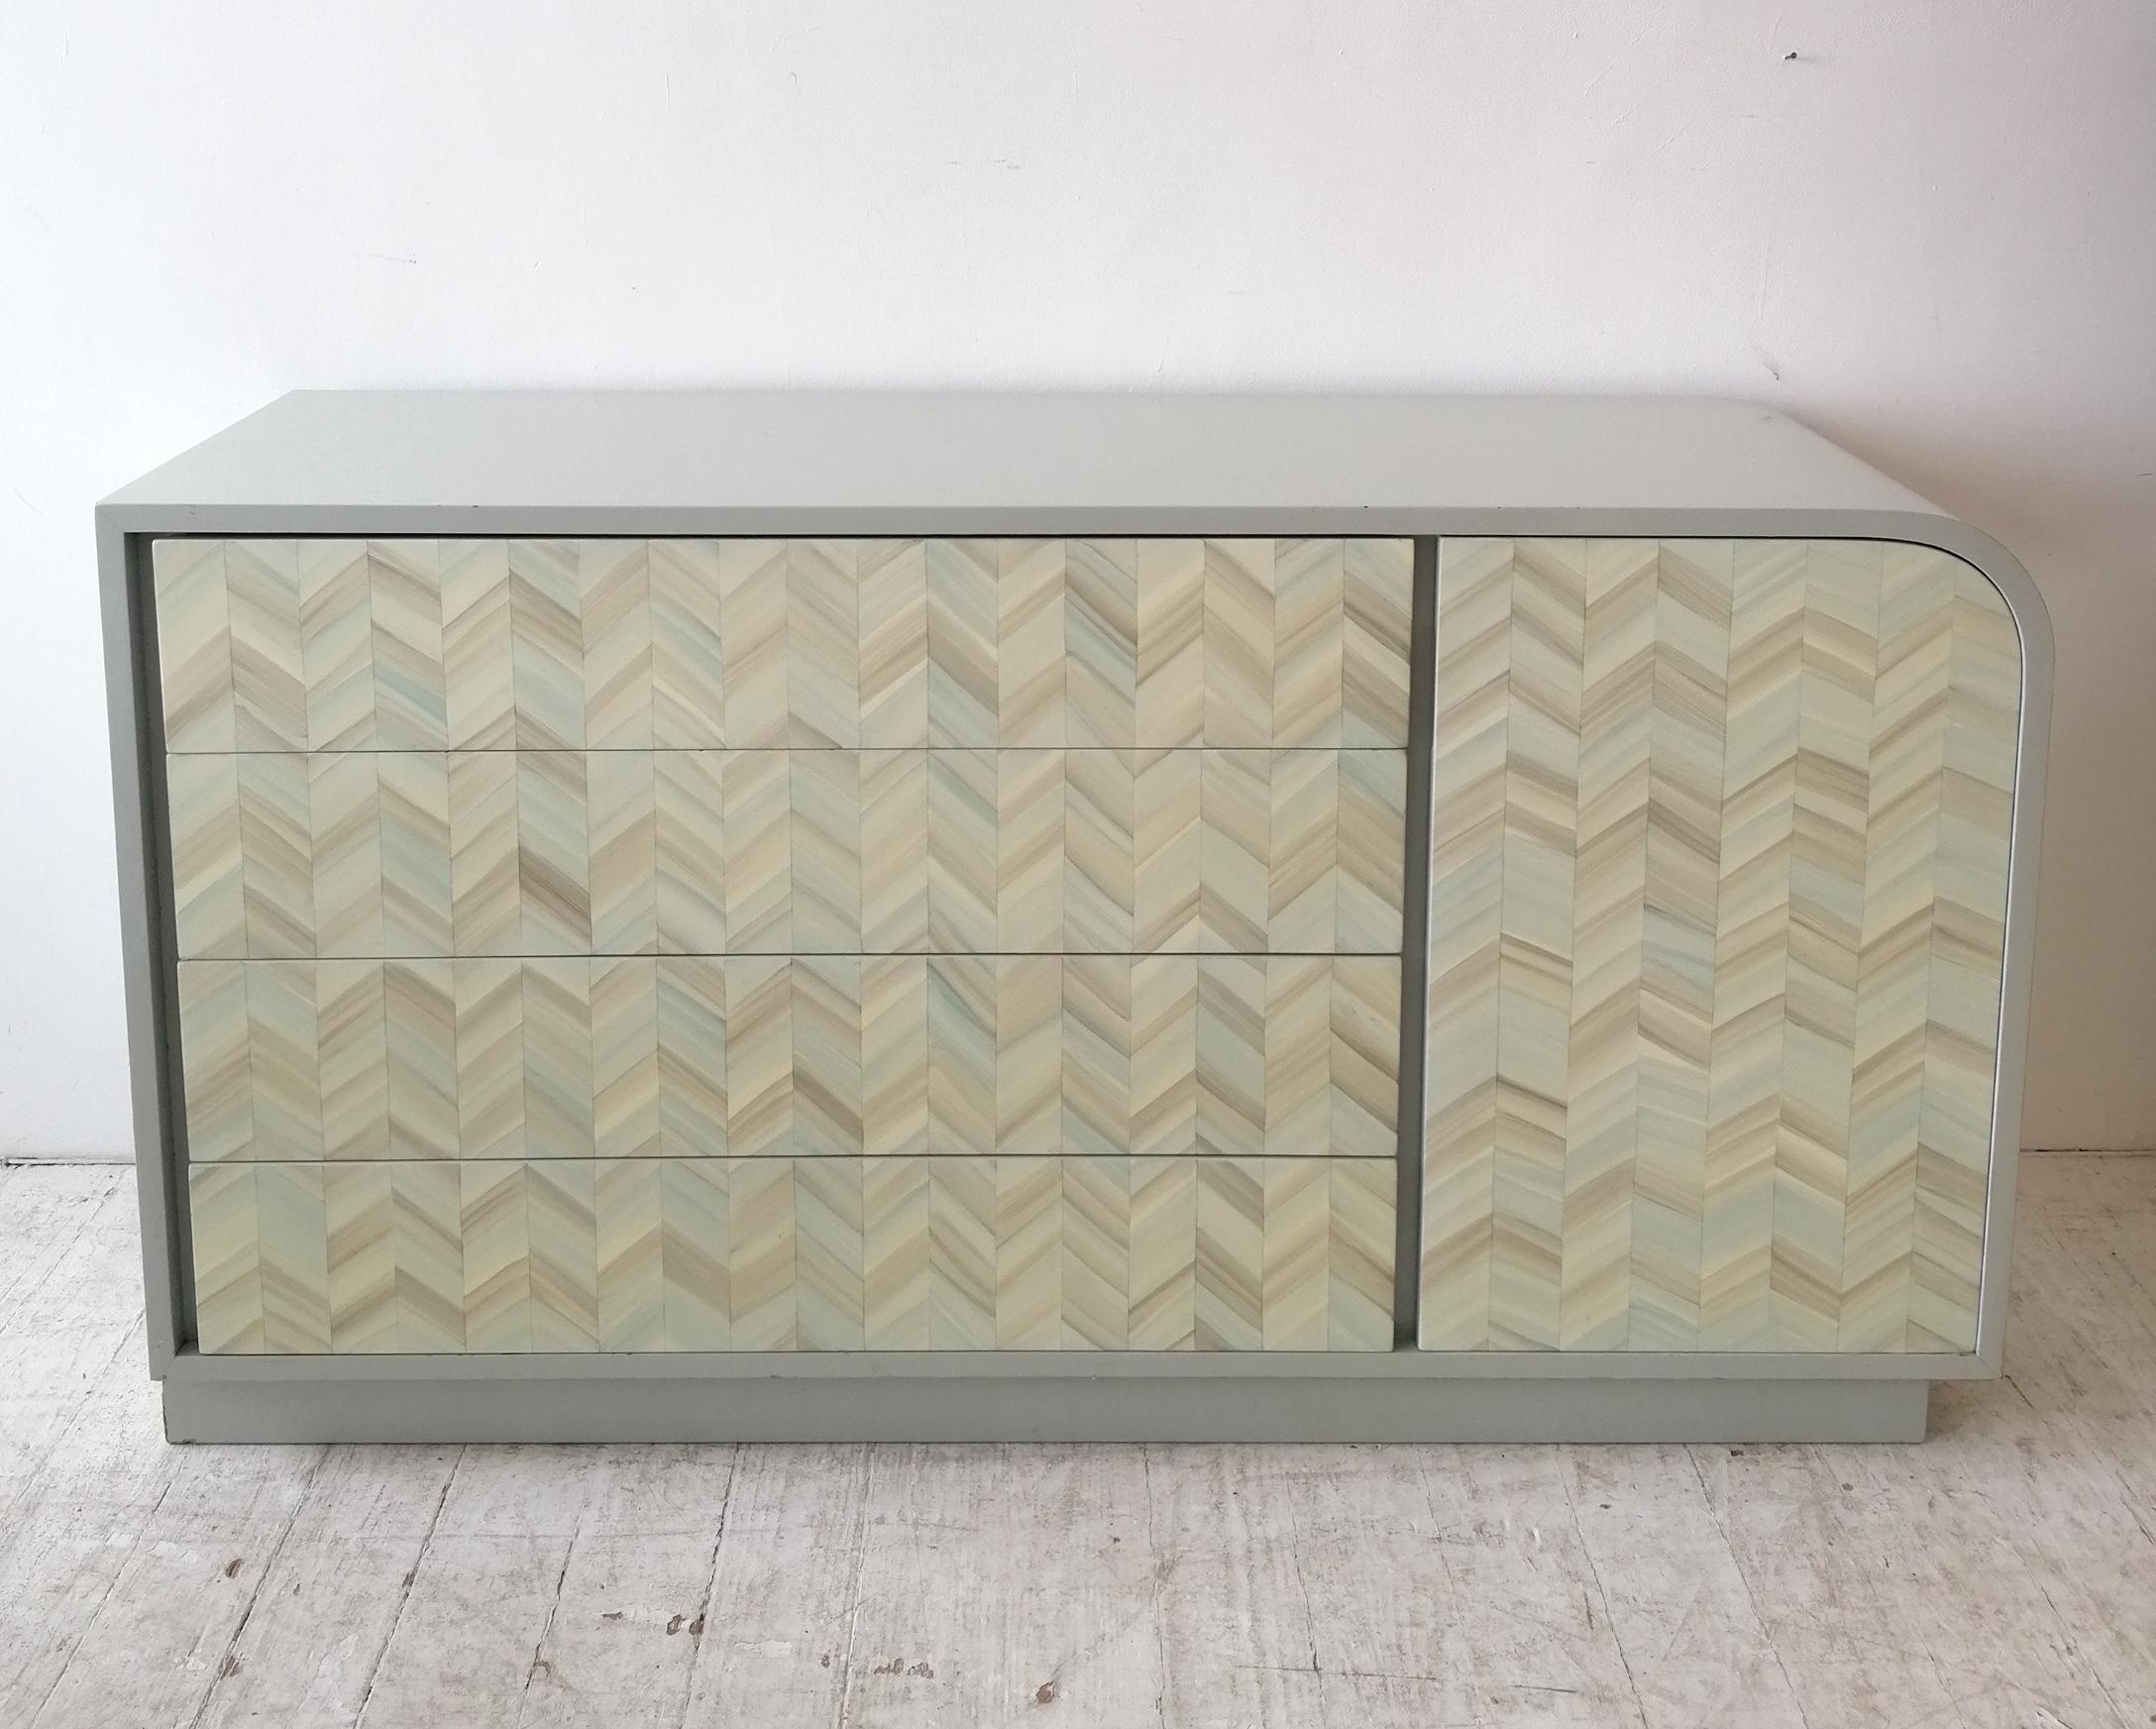 An unusual postmodern American lacquered waterfall sideboard with trompe l'oeil chevron design on front.
The rest of the body is glossy grey which has some touched-up areas of wear, mostly on the waterfall end. The left hand end is meant to be